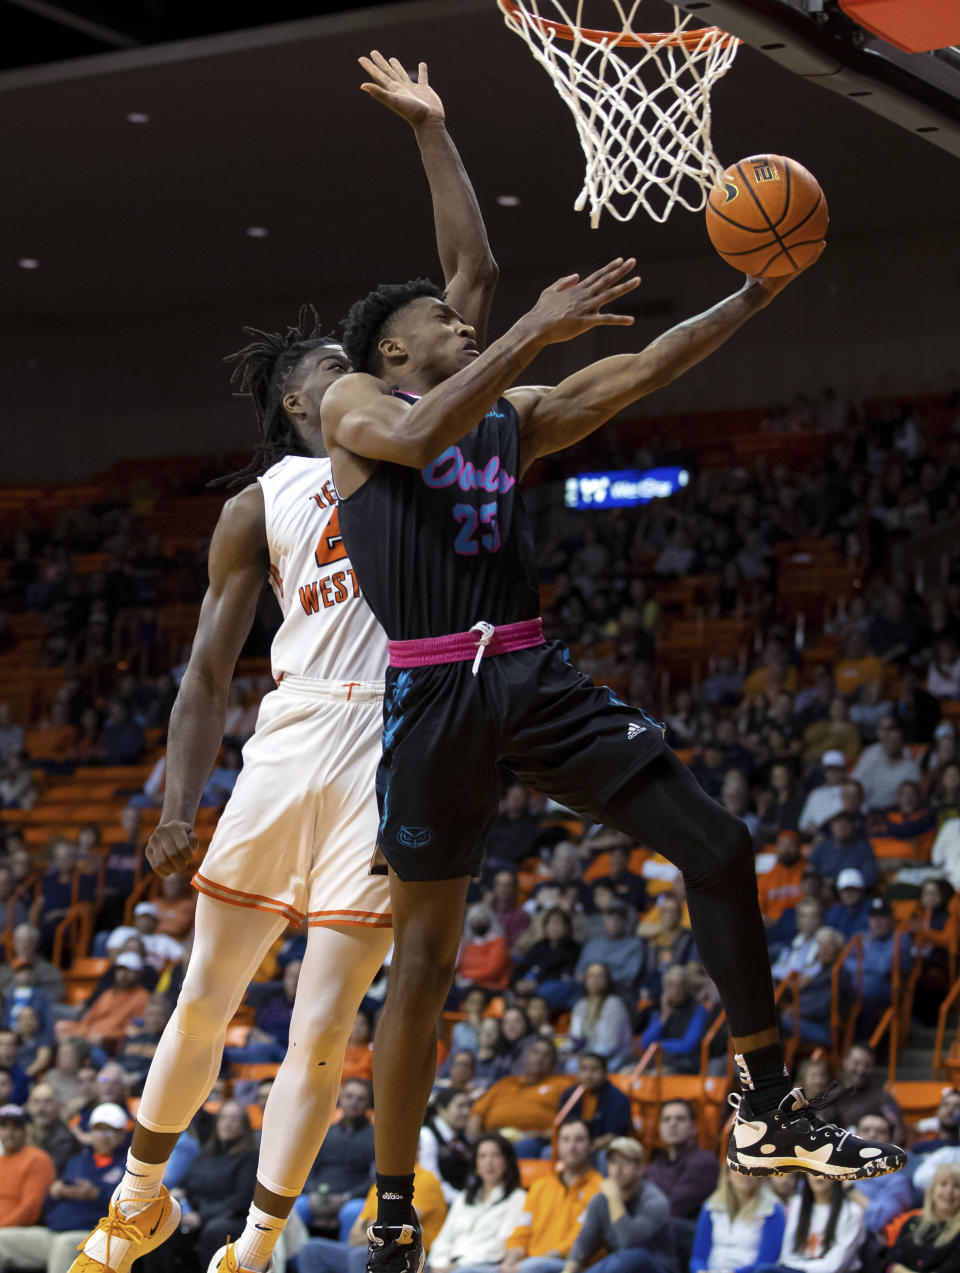 Florida Atlantic forward Tre Carroll (25) drives for a layup as UTEP forward Ze'Rik Onyema defends during the second half of an NCAA college basketball game Saturday, Jan. 21, 2023, in El Paso, Texas. (AP Photo/Andrés Leighton)